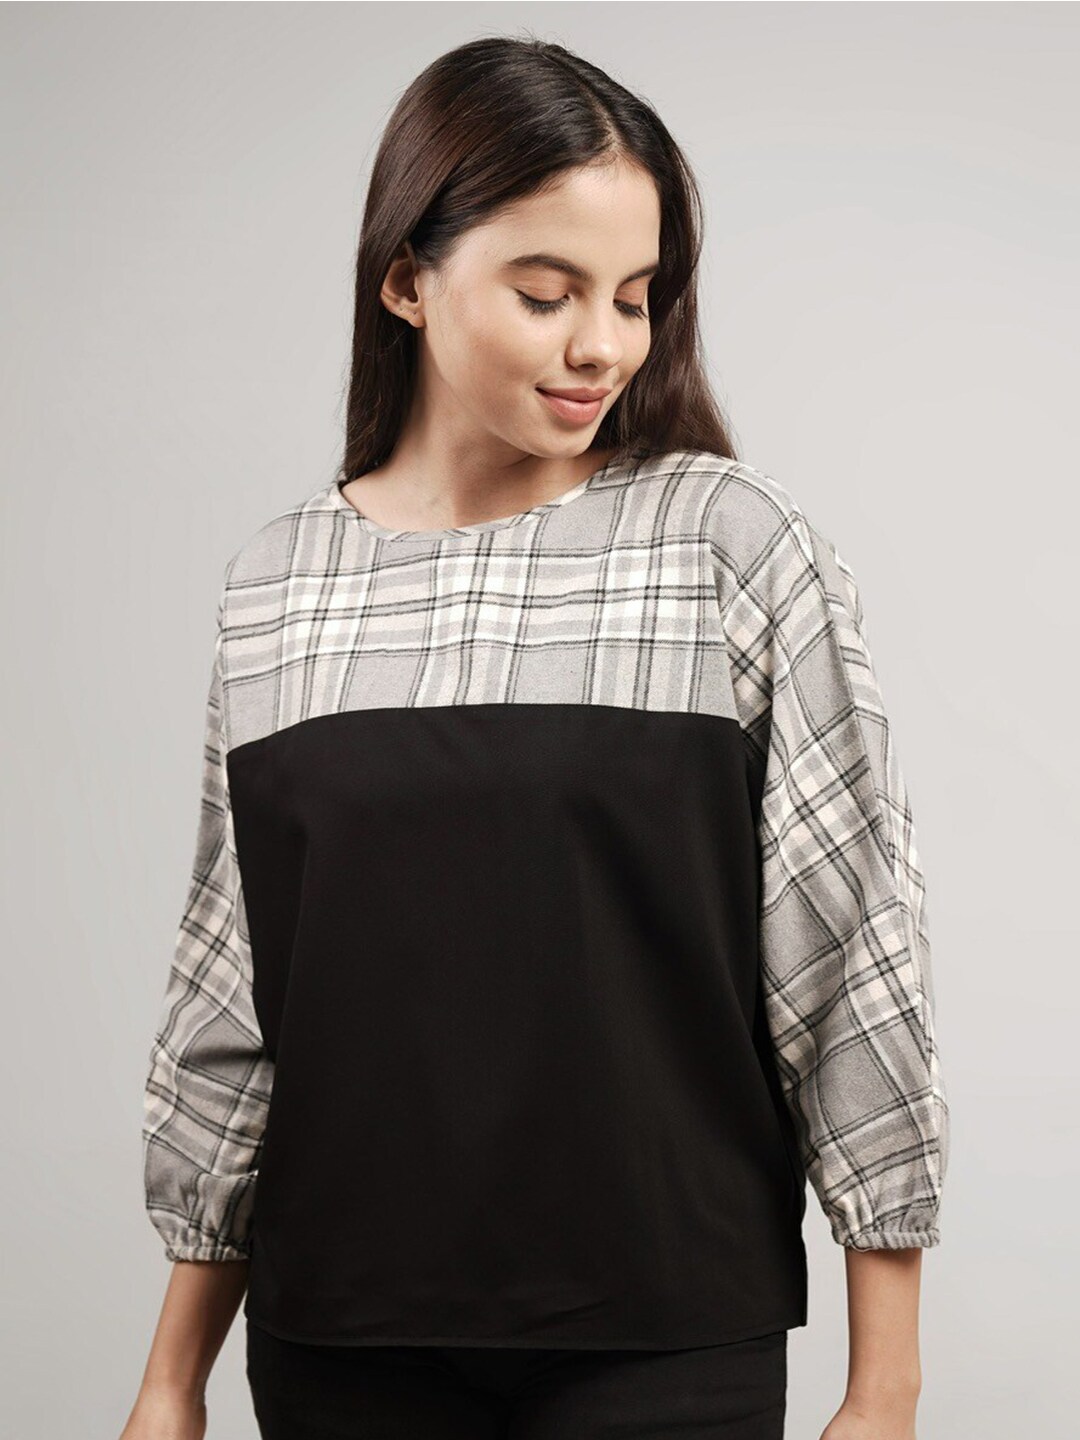 IDK Checked Cuffed Sleeve Crepe Top Price in India